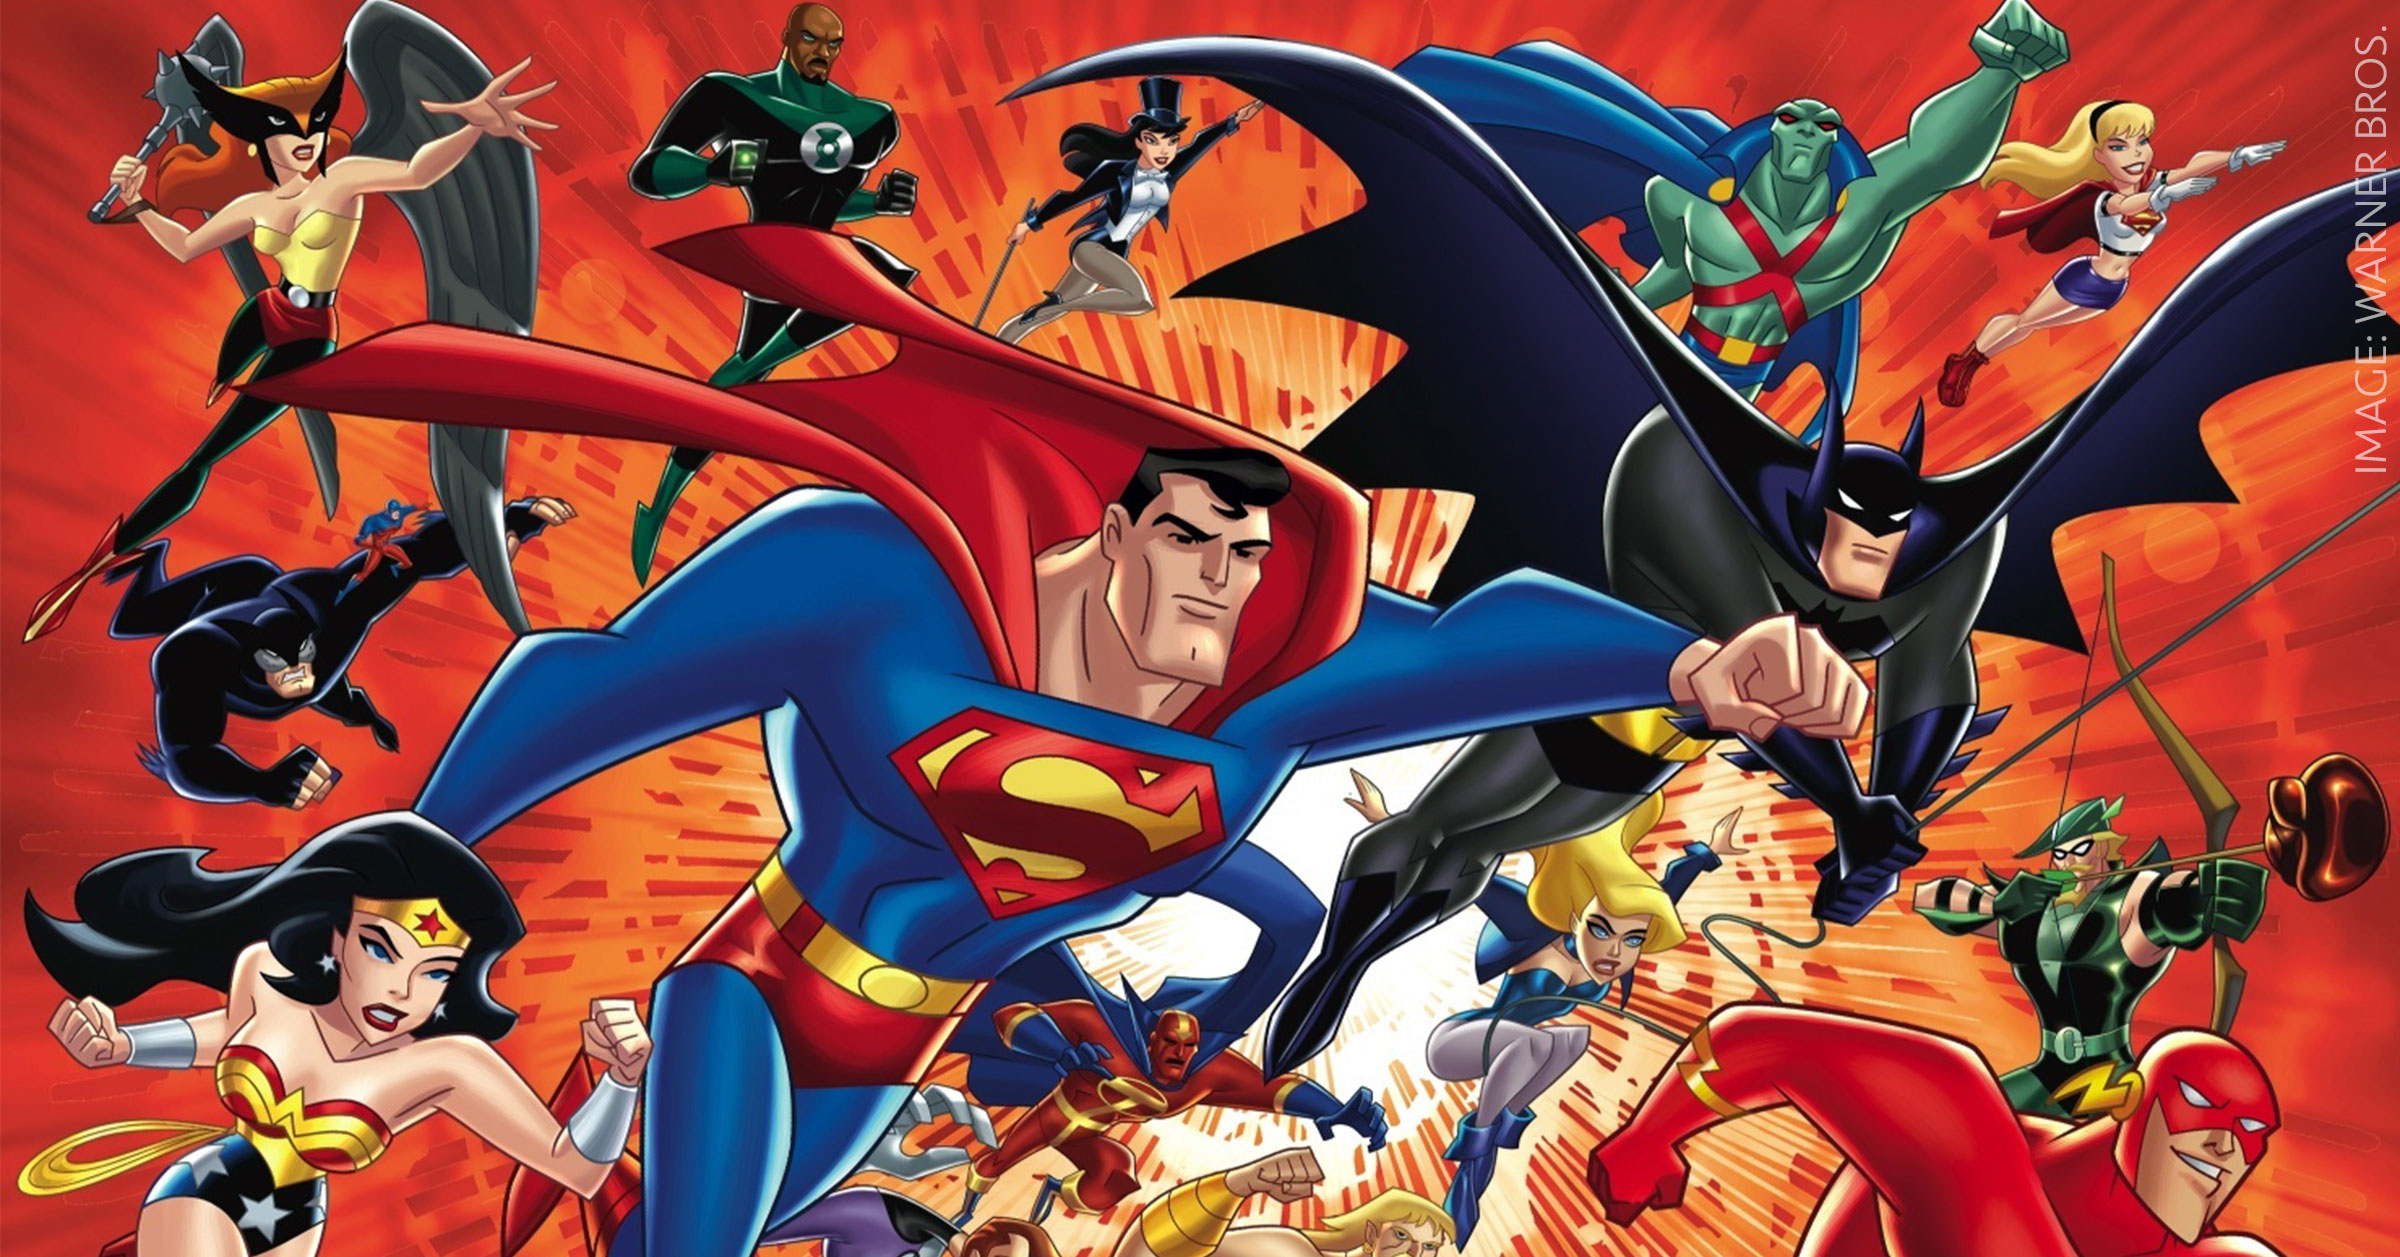 TV Show Justice League Unlimited HD Wallpaper | Background Image